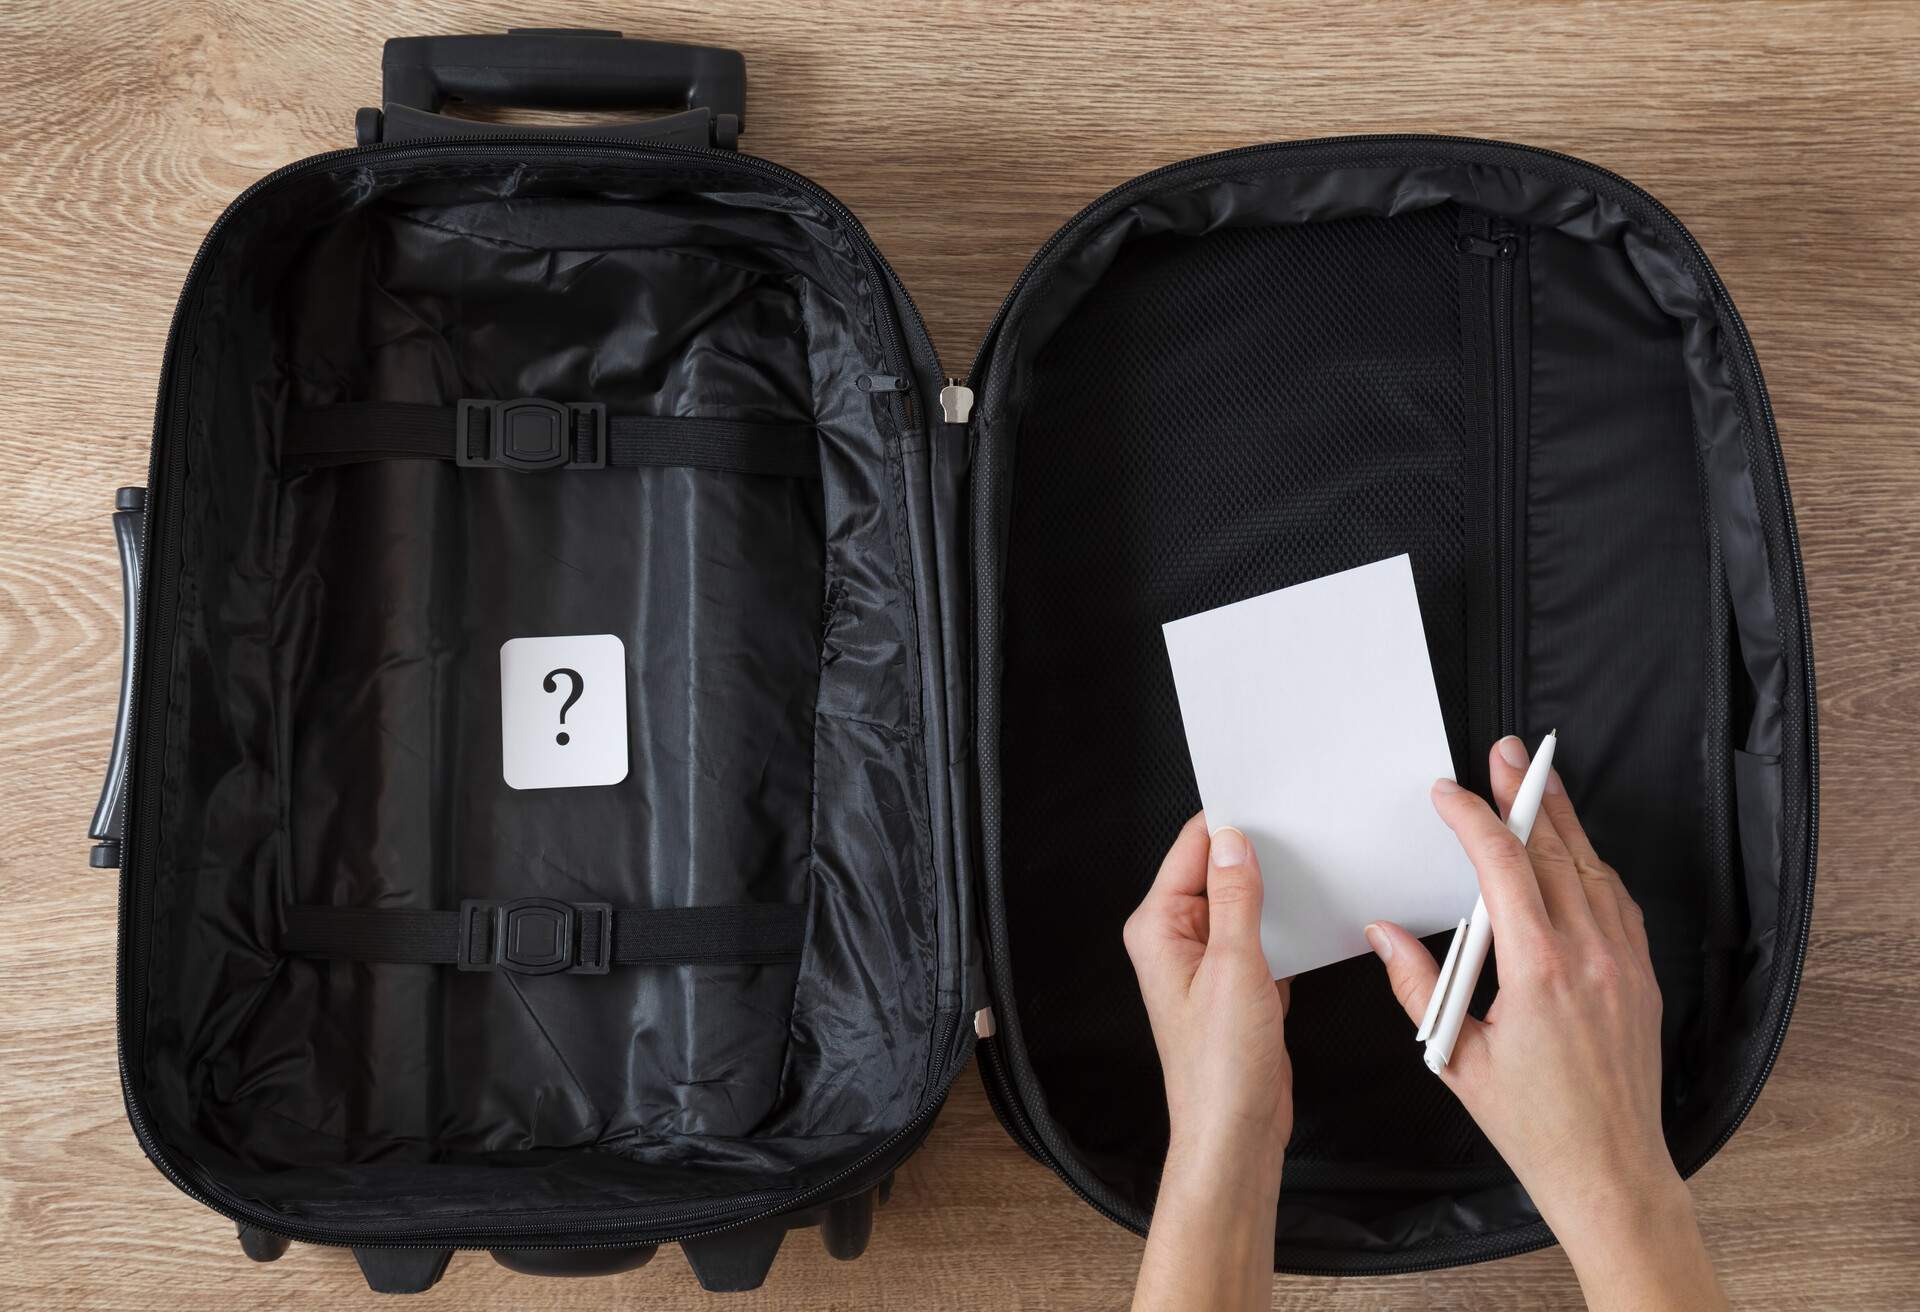 An opened empty, black travel bag with a question mark written on a white card and an individual holding a piece of paper and a pen.